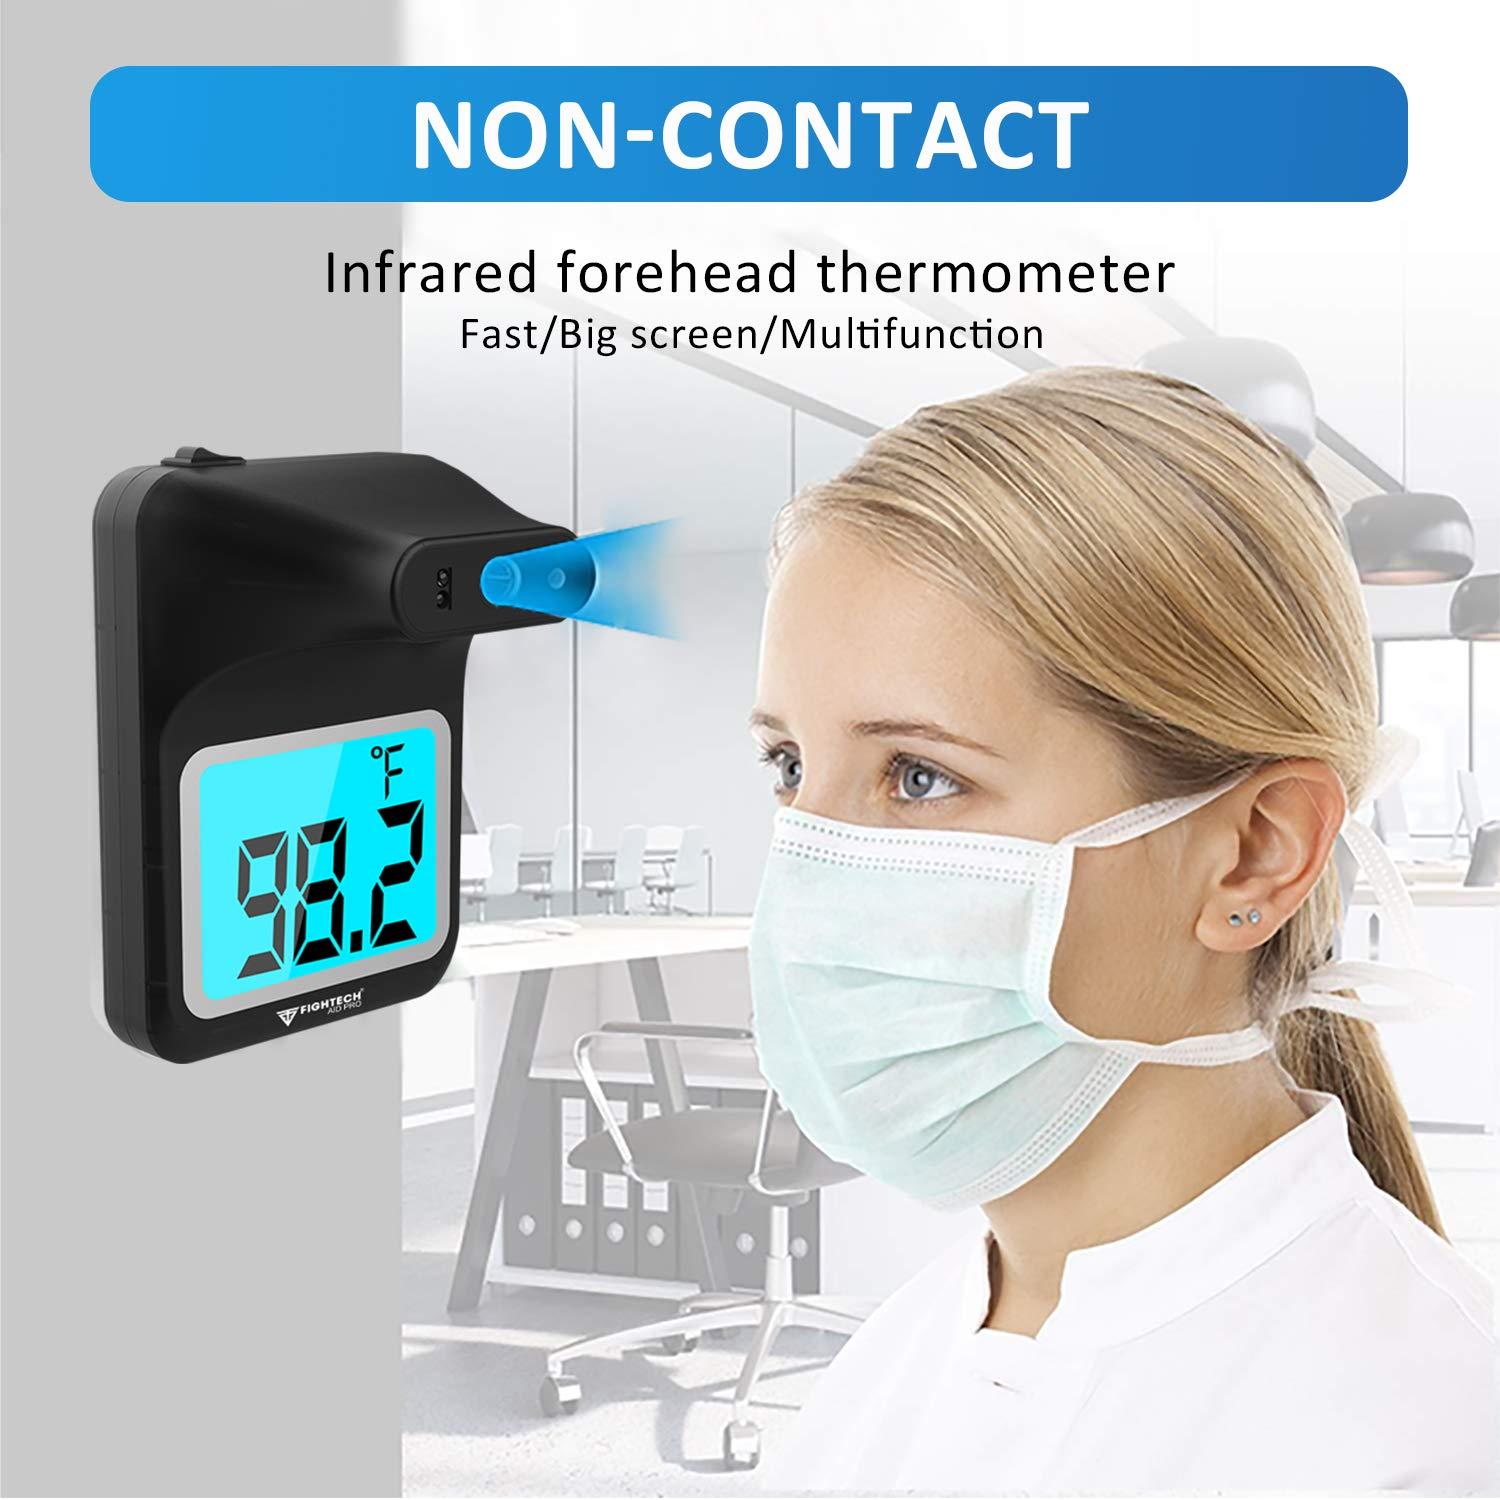 Wall Mounted thermometer: Digital Wall mounted thermometer at